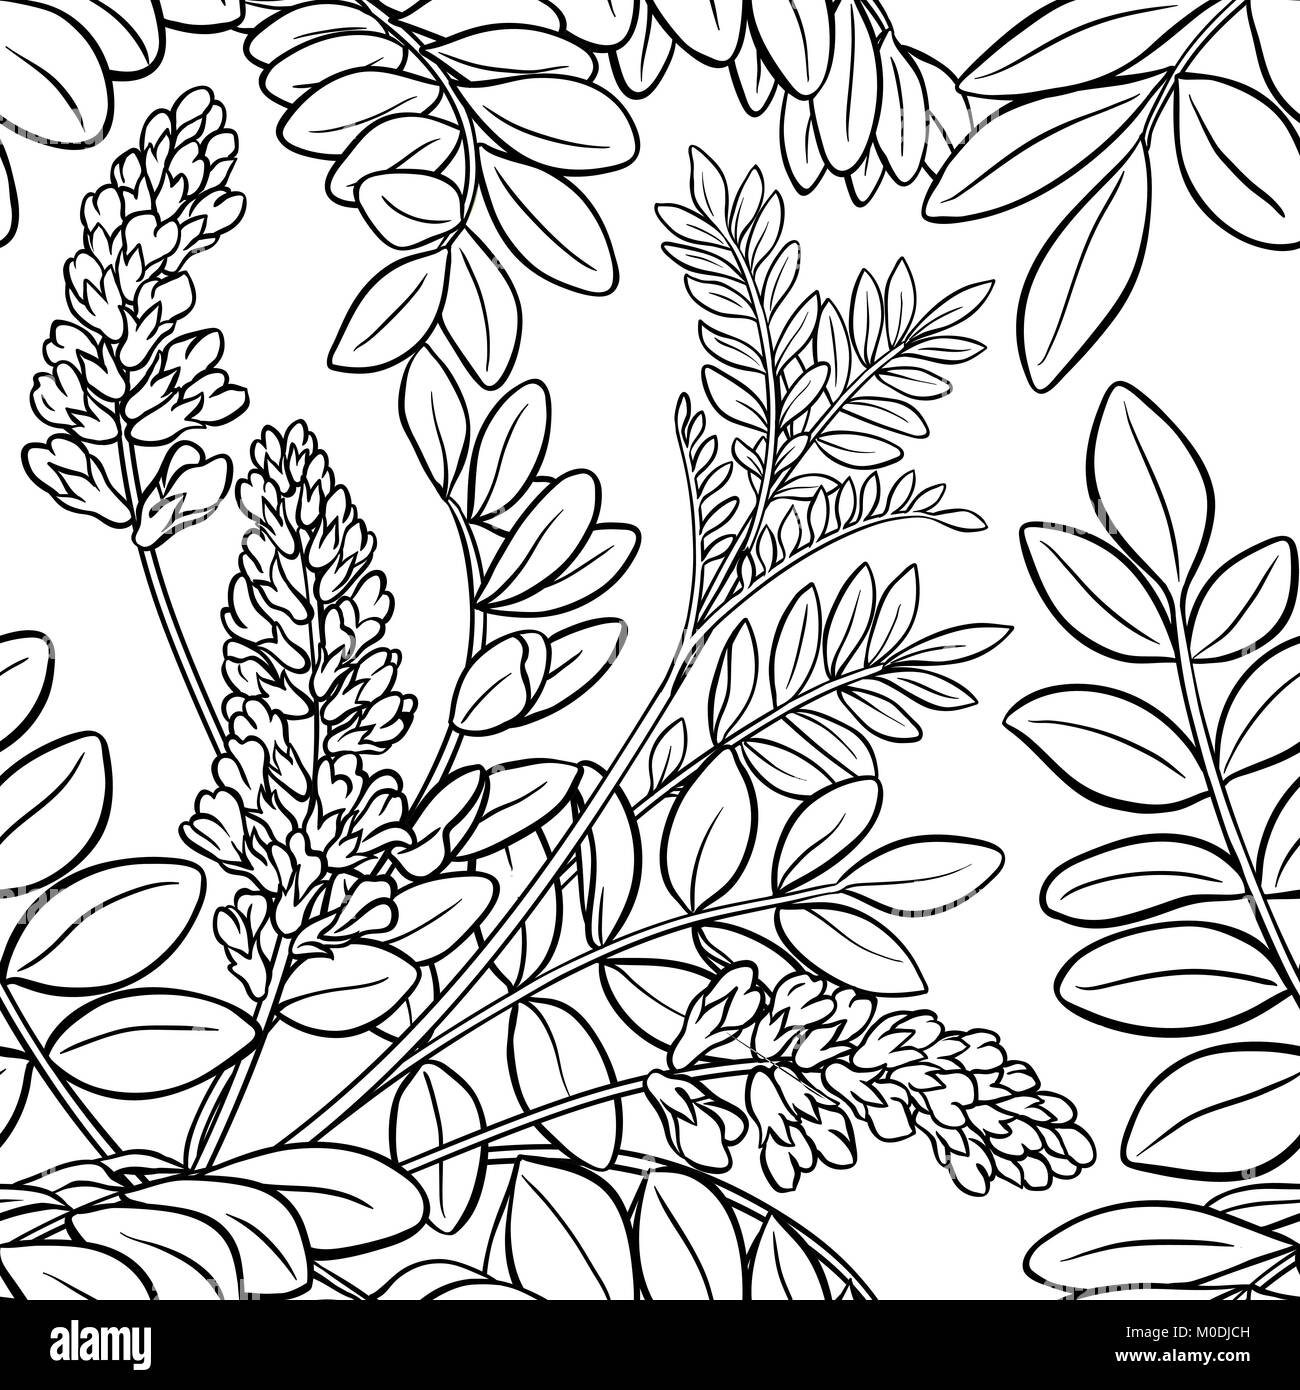 licorice plant seamless pattern on white background Stock Vector